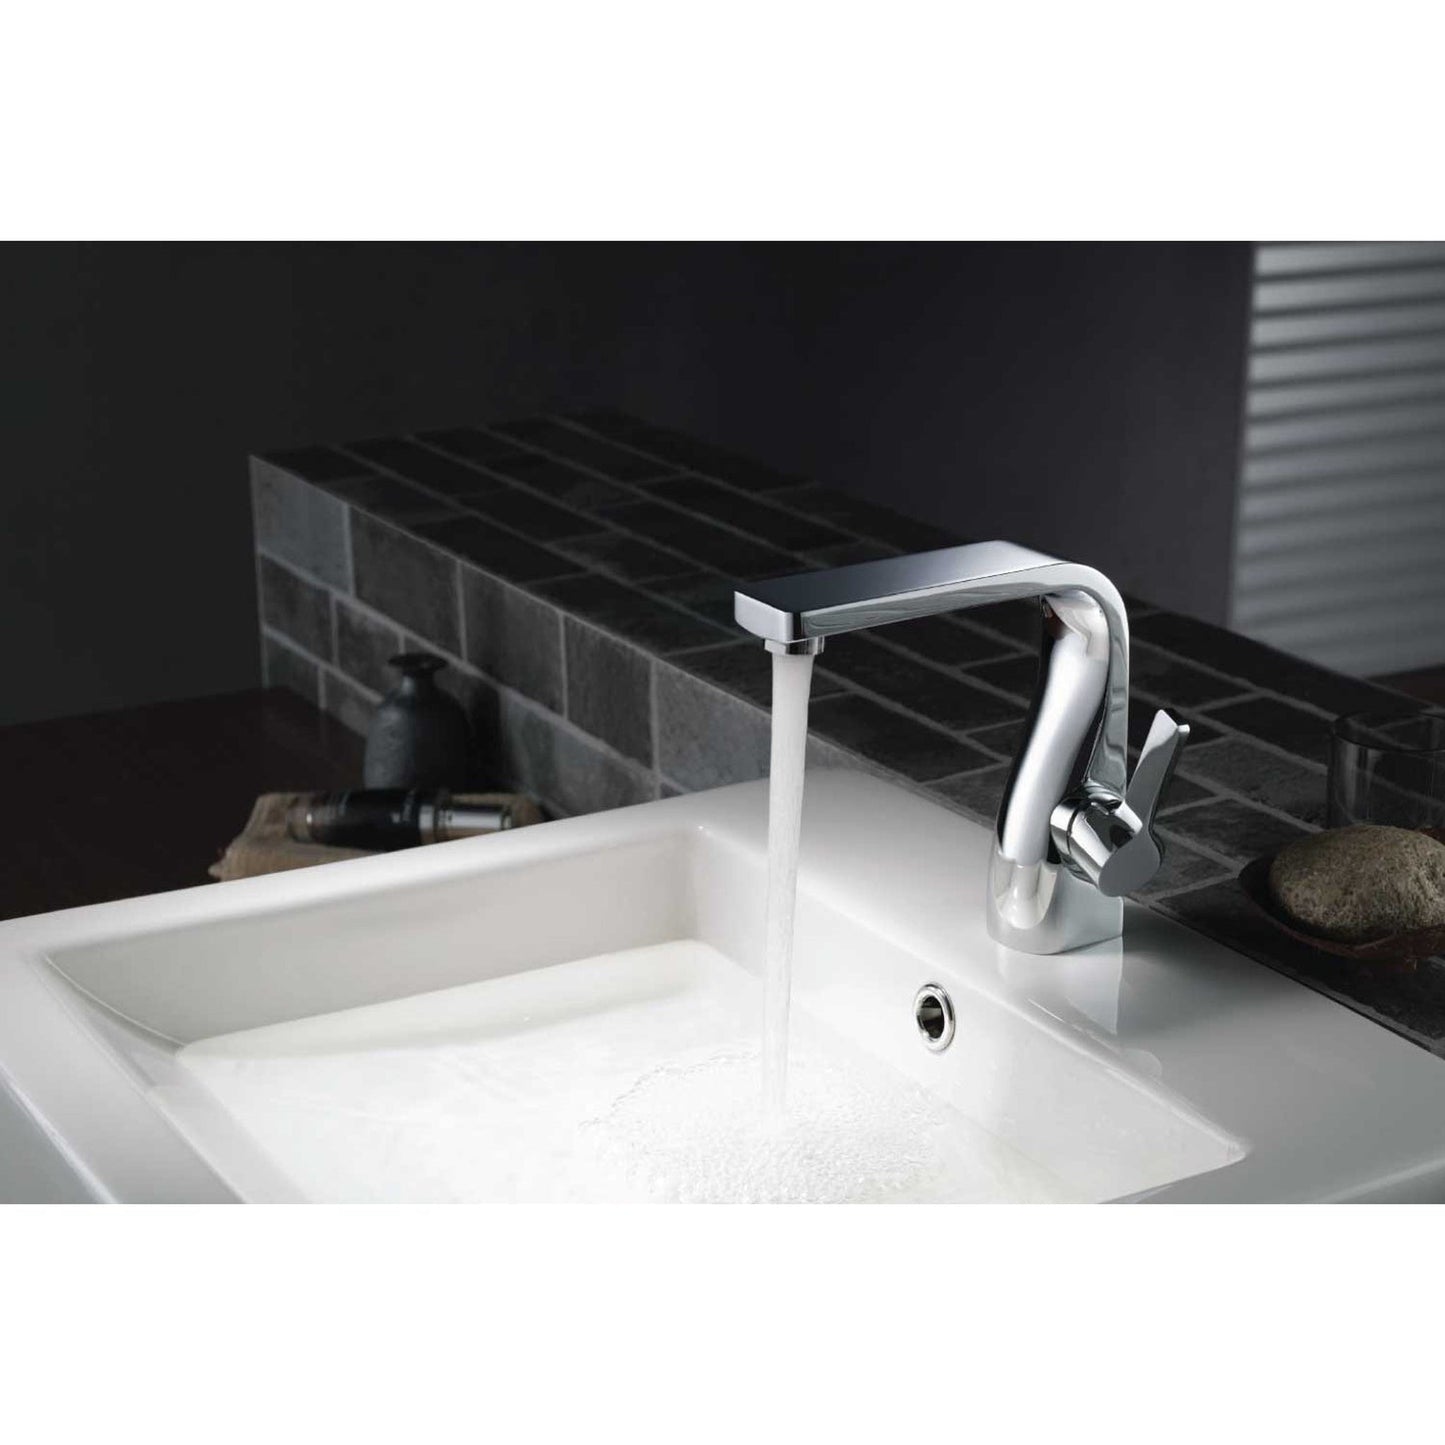 Isenberg Serie 260 6" Single-Hole Brushed Nickel PVD Deck-Mounted Bathroom Sink Faucet With Pop-Up Drain